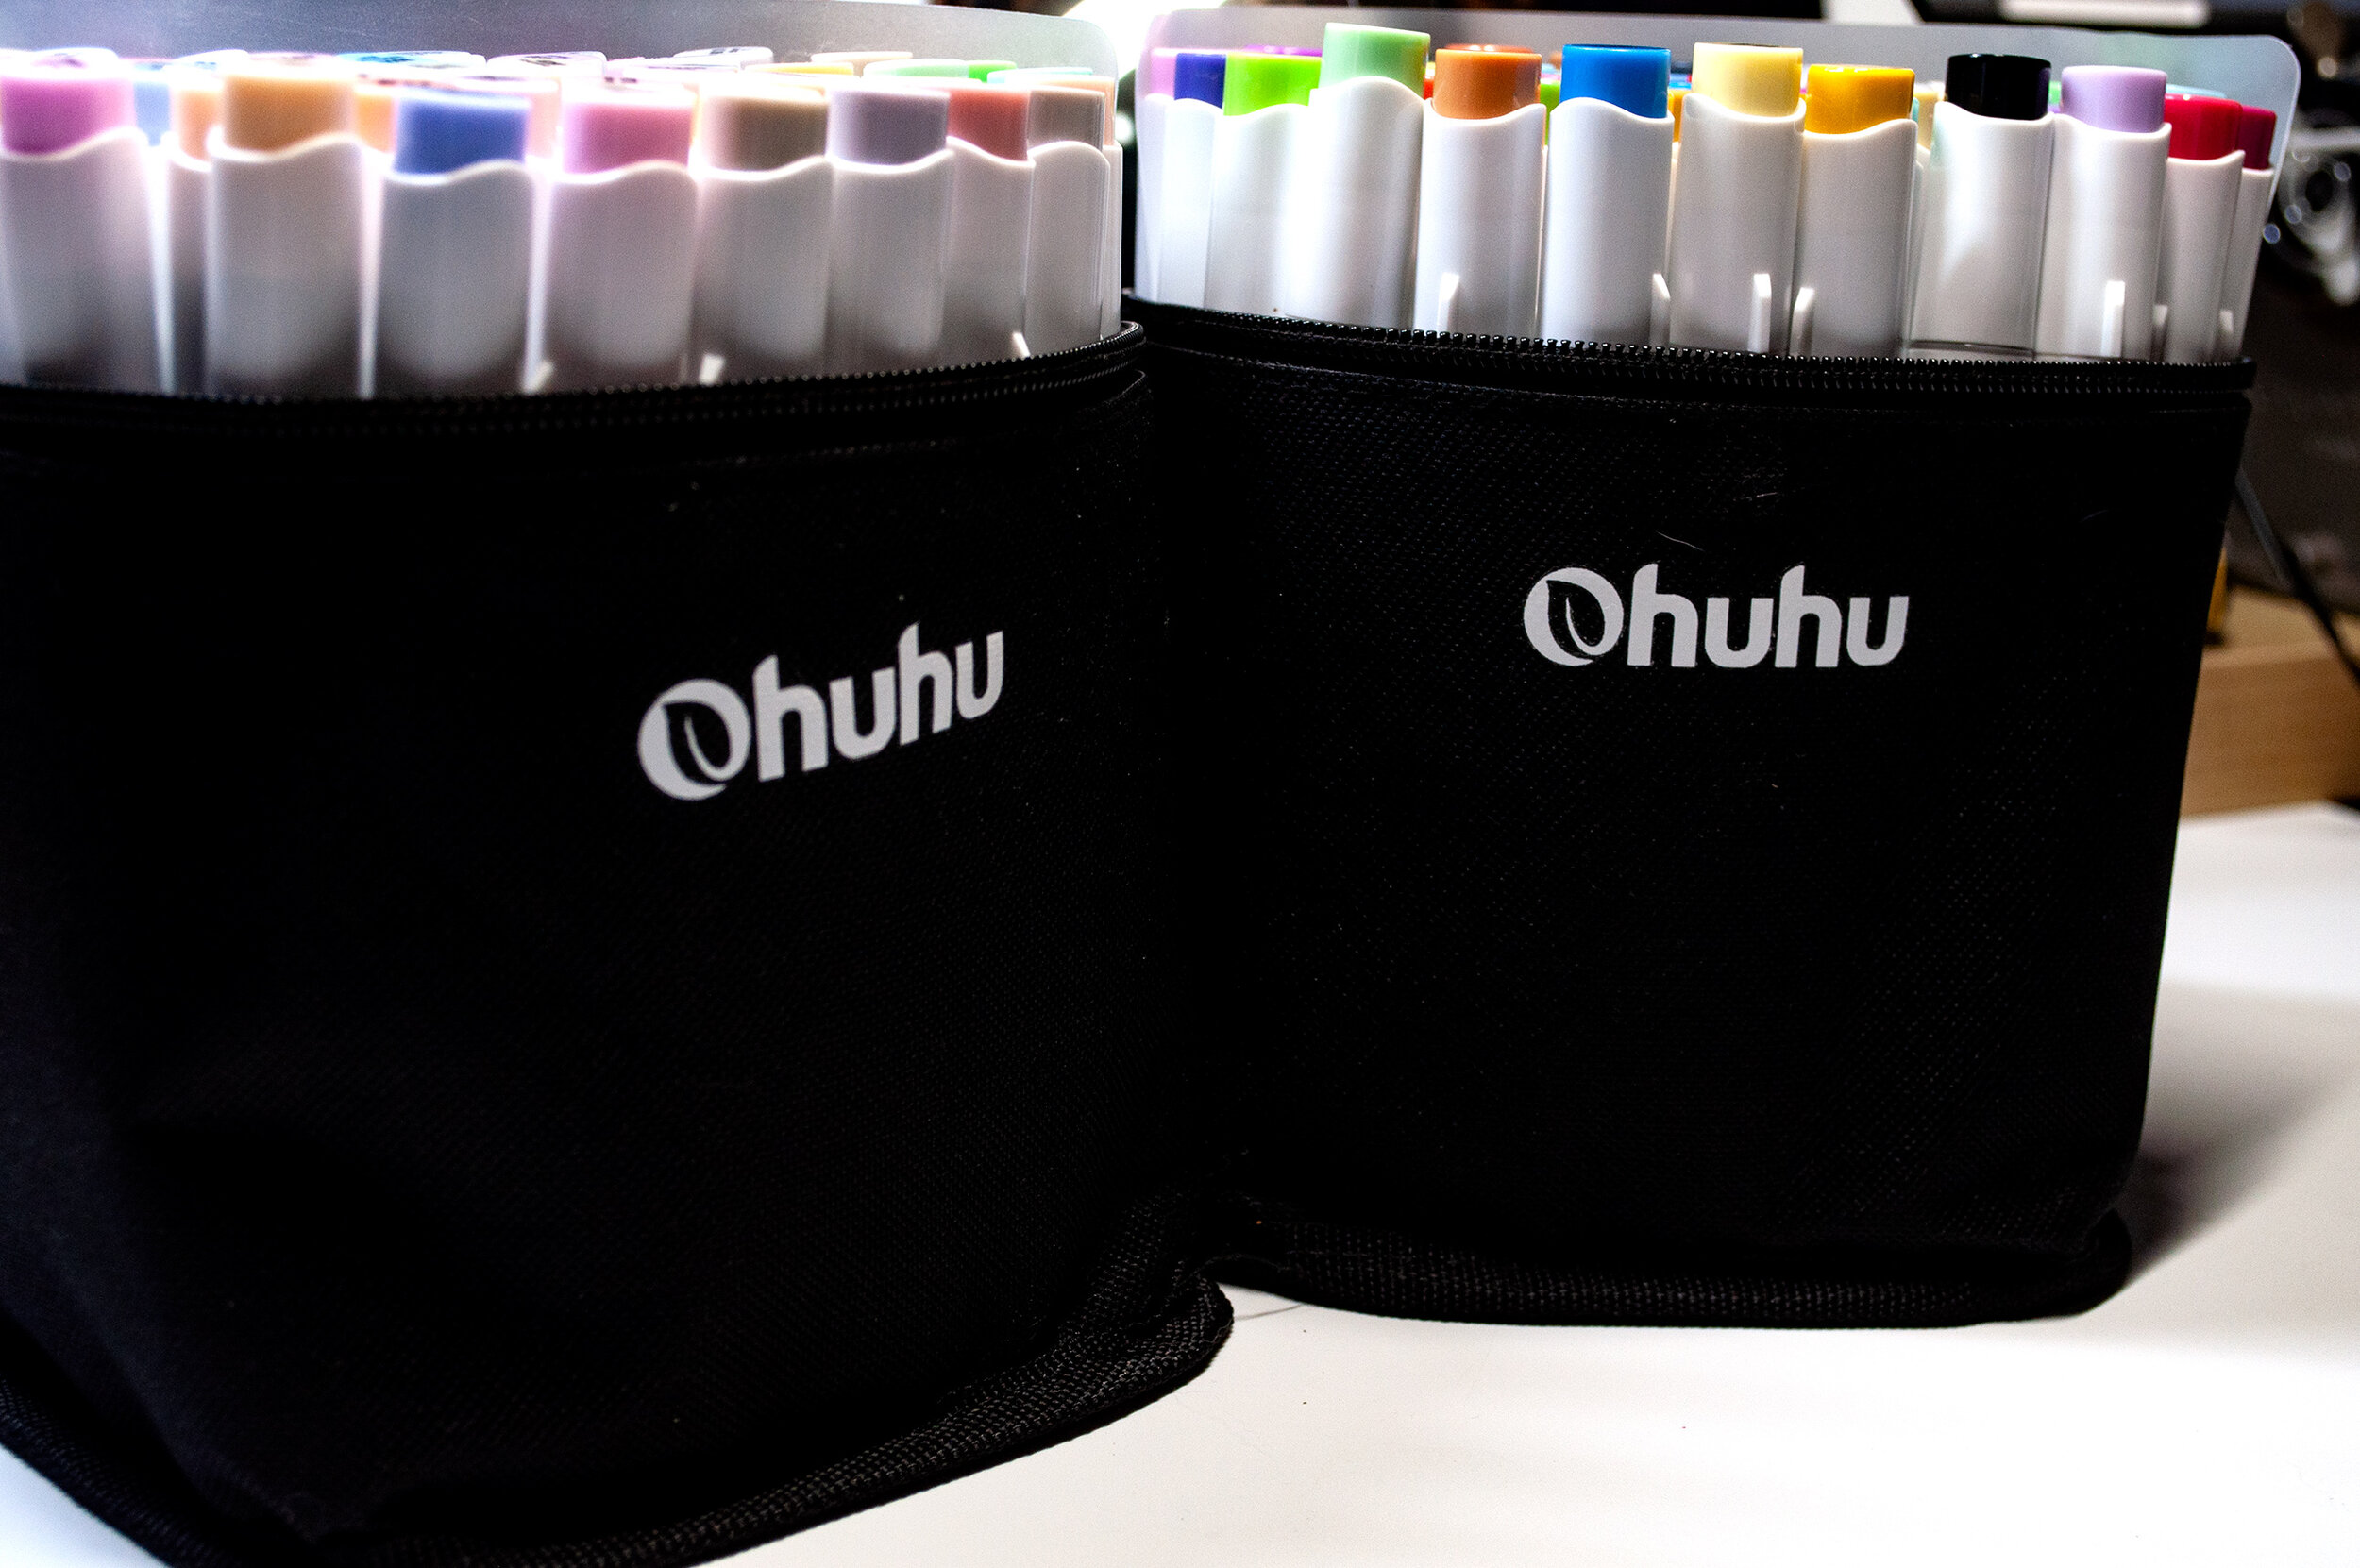 Ohuhu Markers VS Caliart Markers - Marker Review 